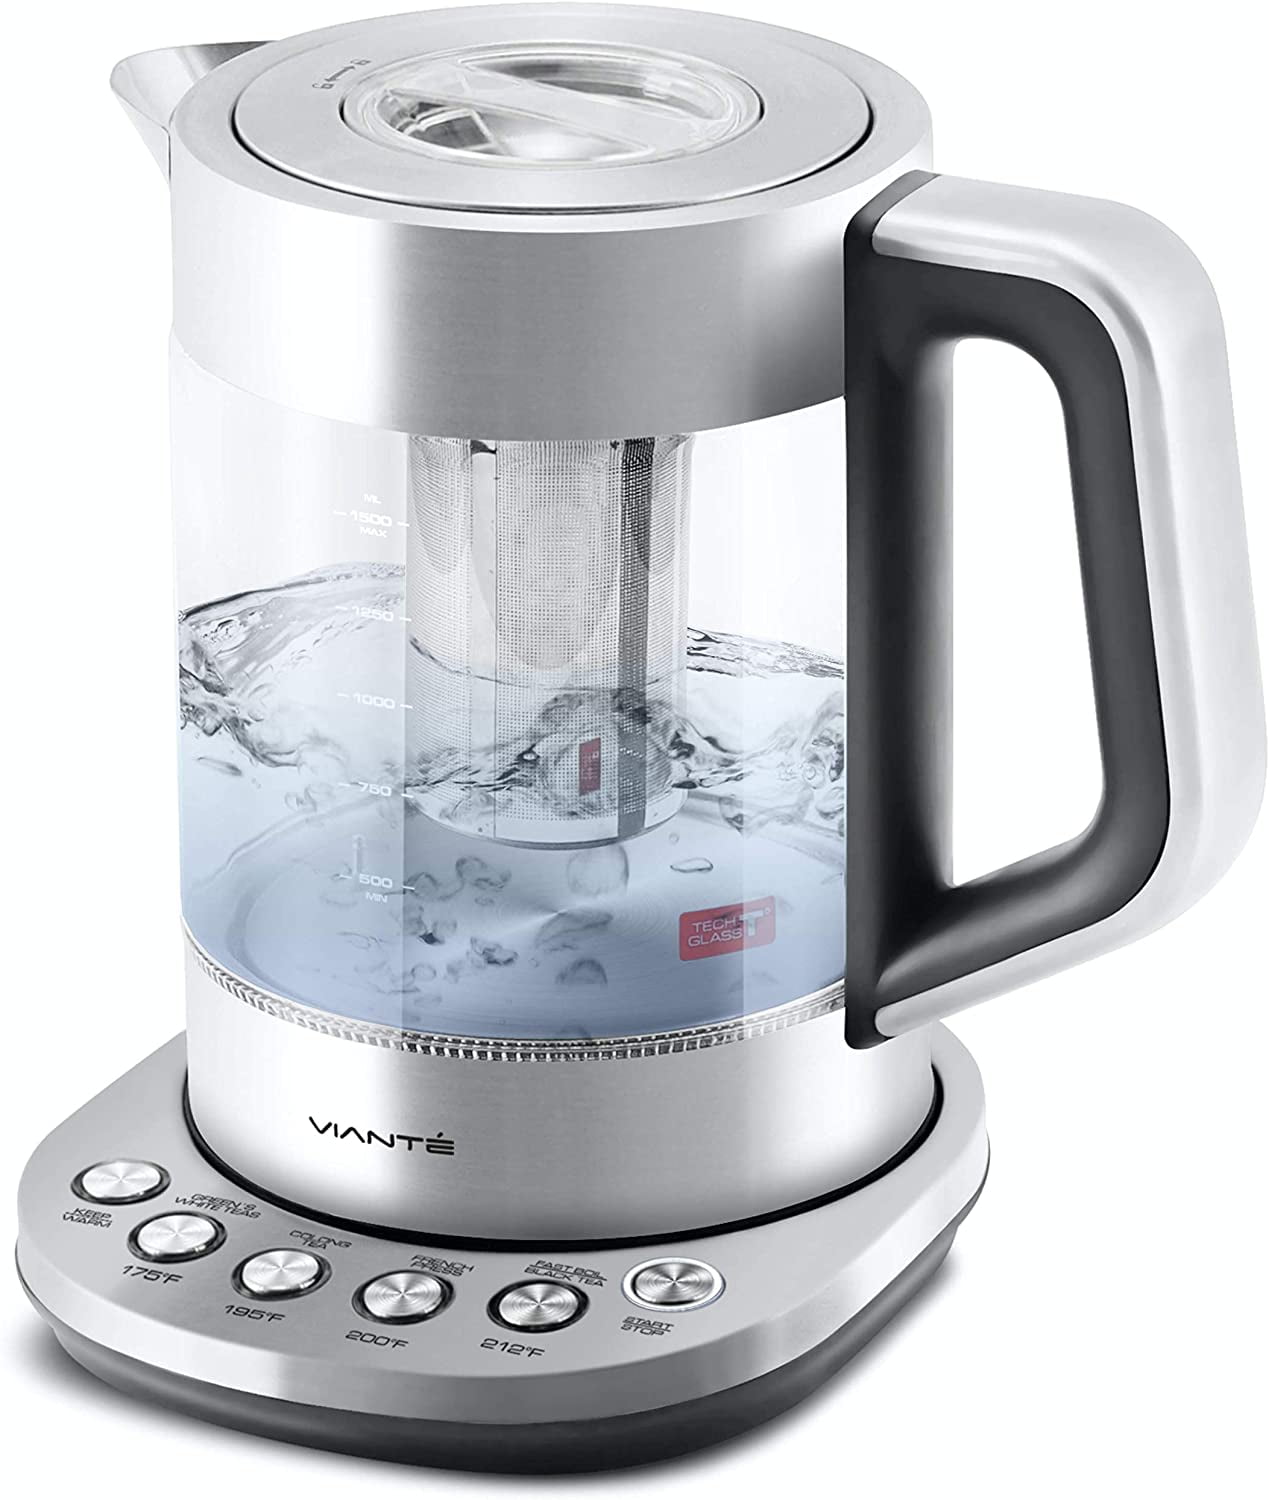 Vianté Hot Tea Maker Electric Glass Kettle with tea infuser and temperature  control. Automatic Shut off. Brewing Programs for your favorite teas and